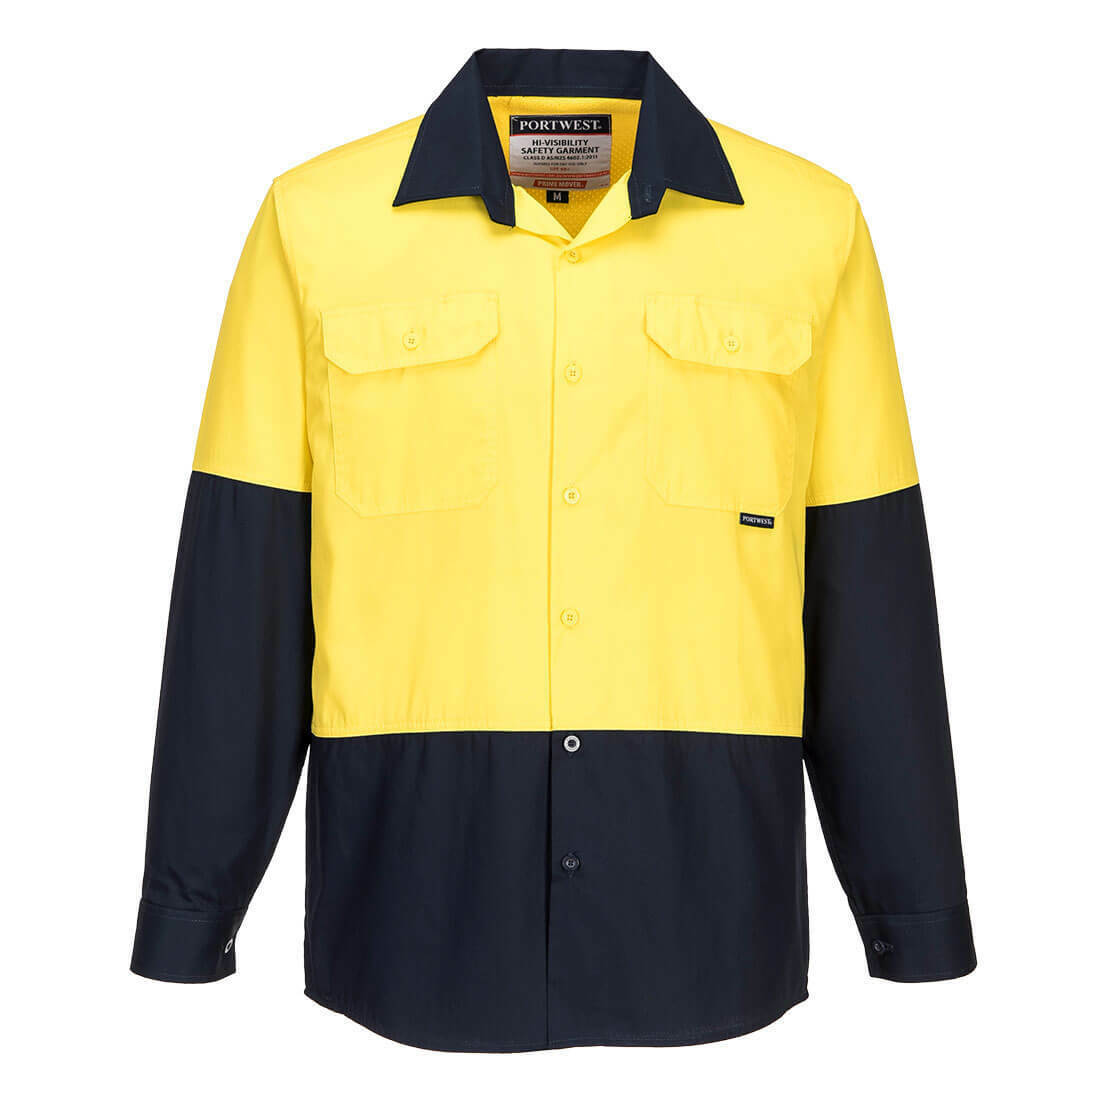 Portwest Mens Prime Mover Hi-Vis Lightweight Long Sleeve Cotton Drill MS801-Collins Clothing Co